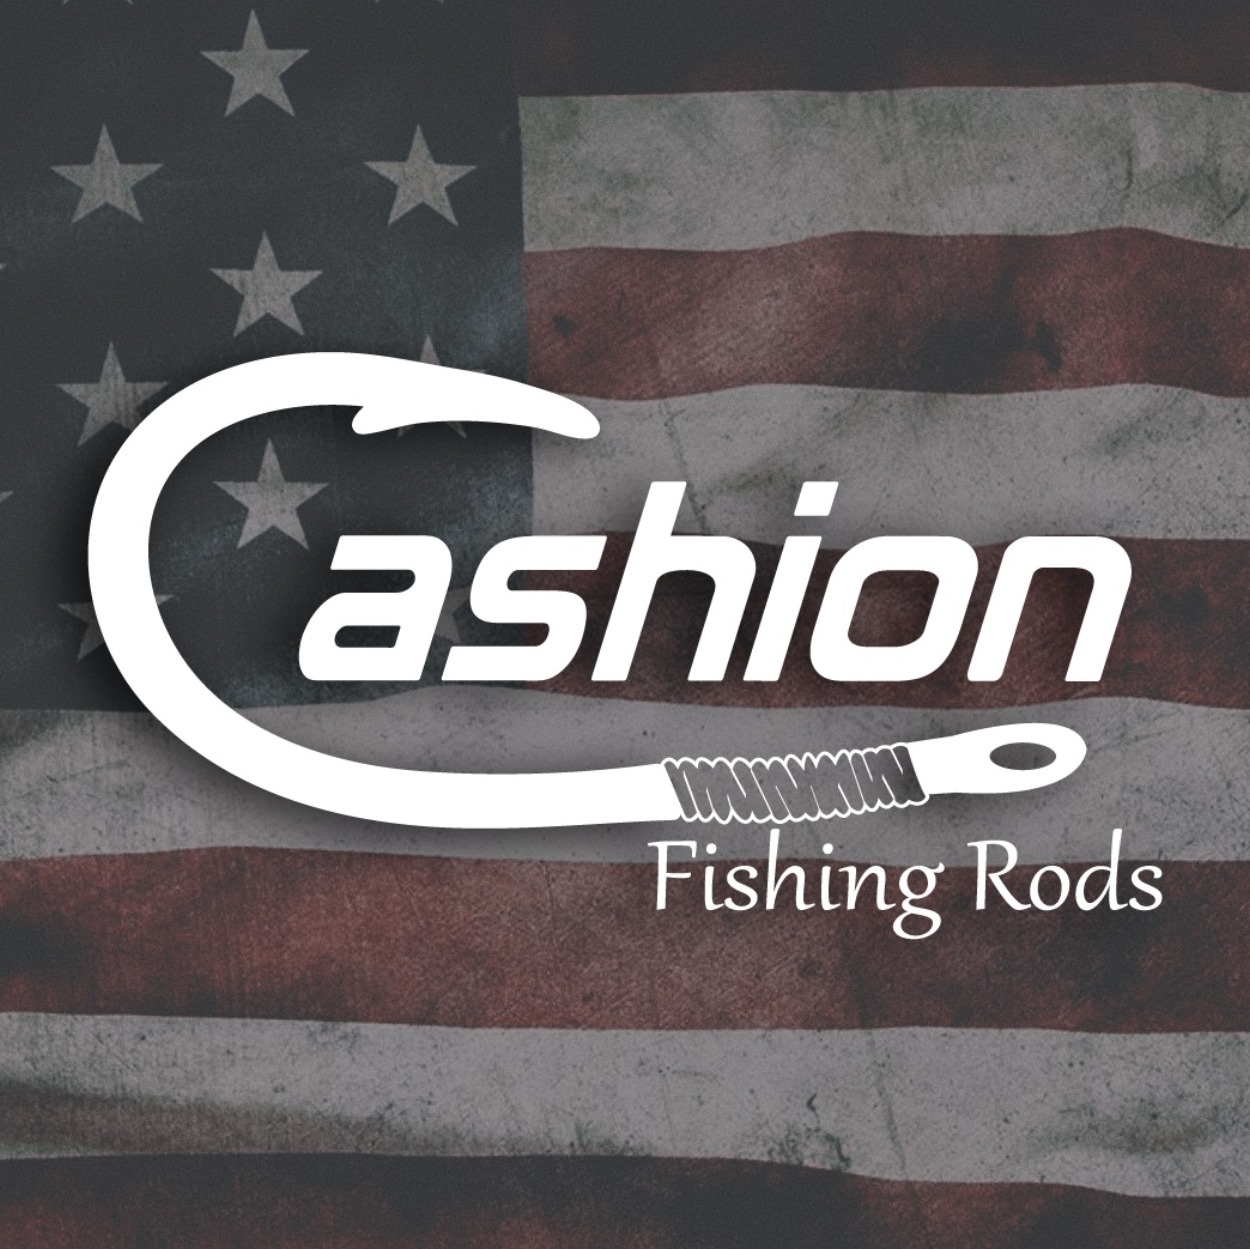 Cashion Fishing Rods in Sanford, NC